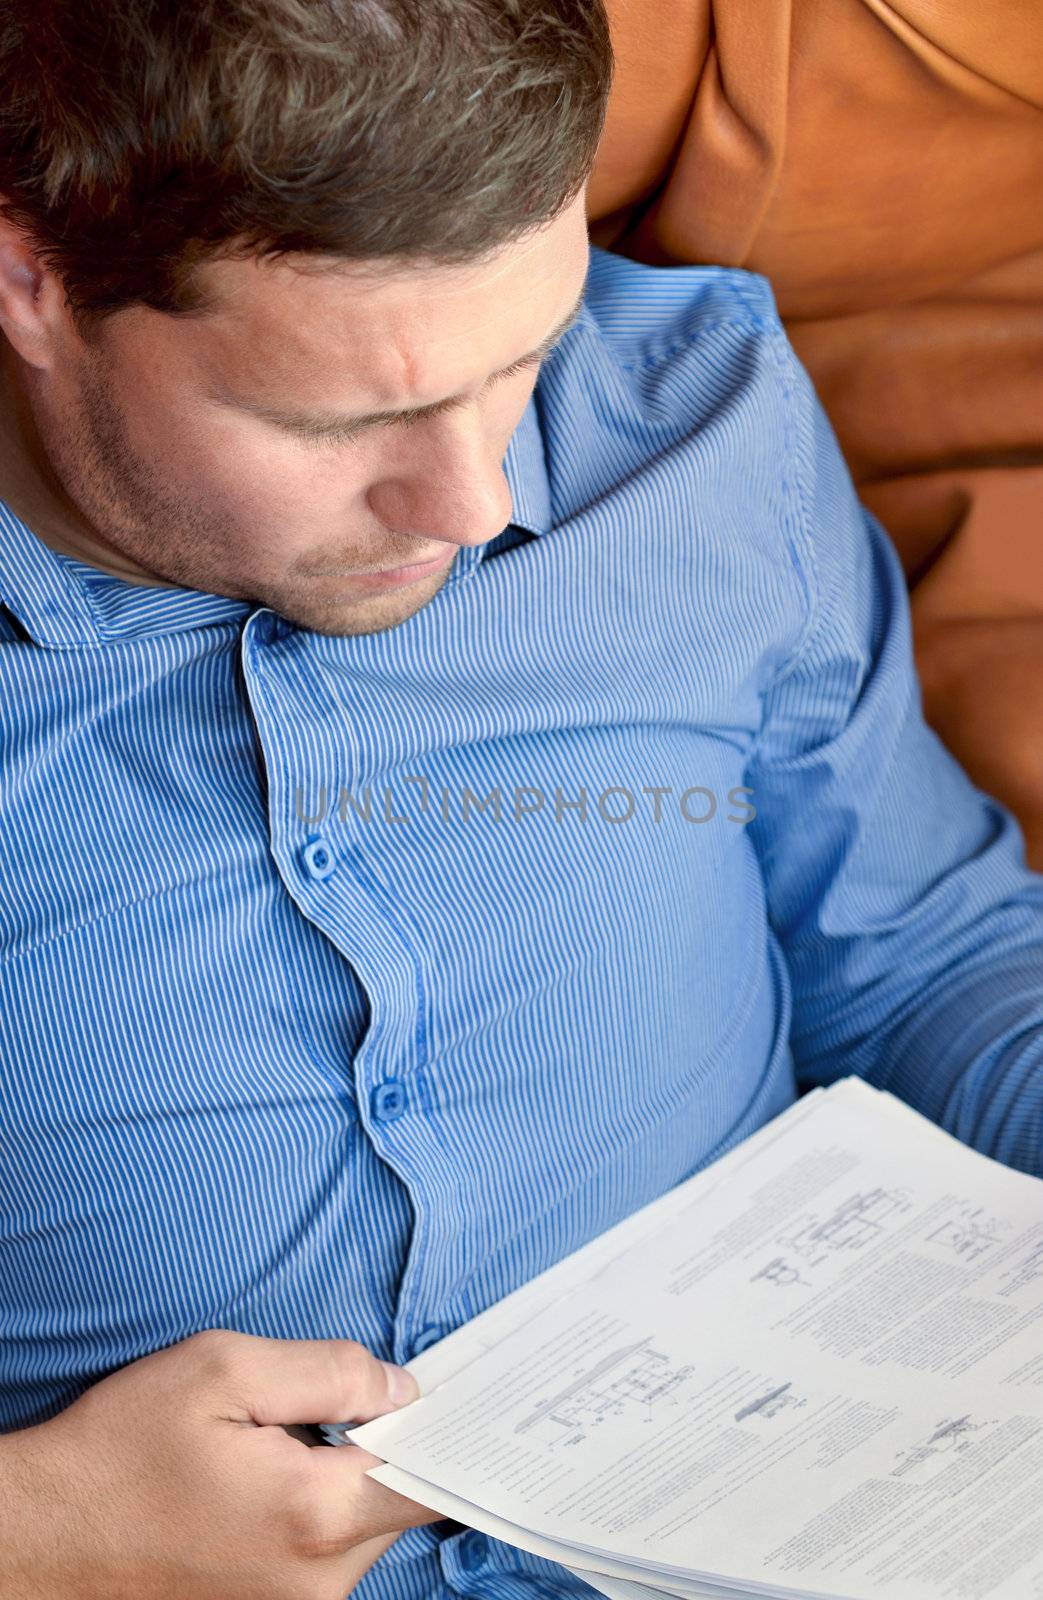 Young businessman analyzing some sheets